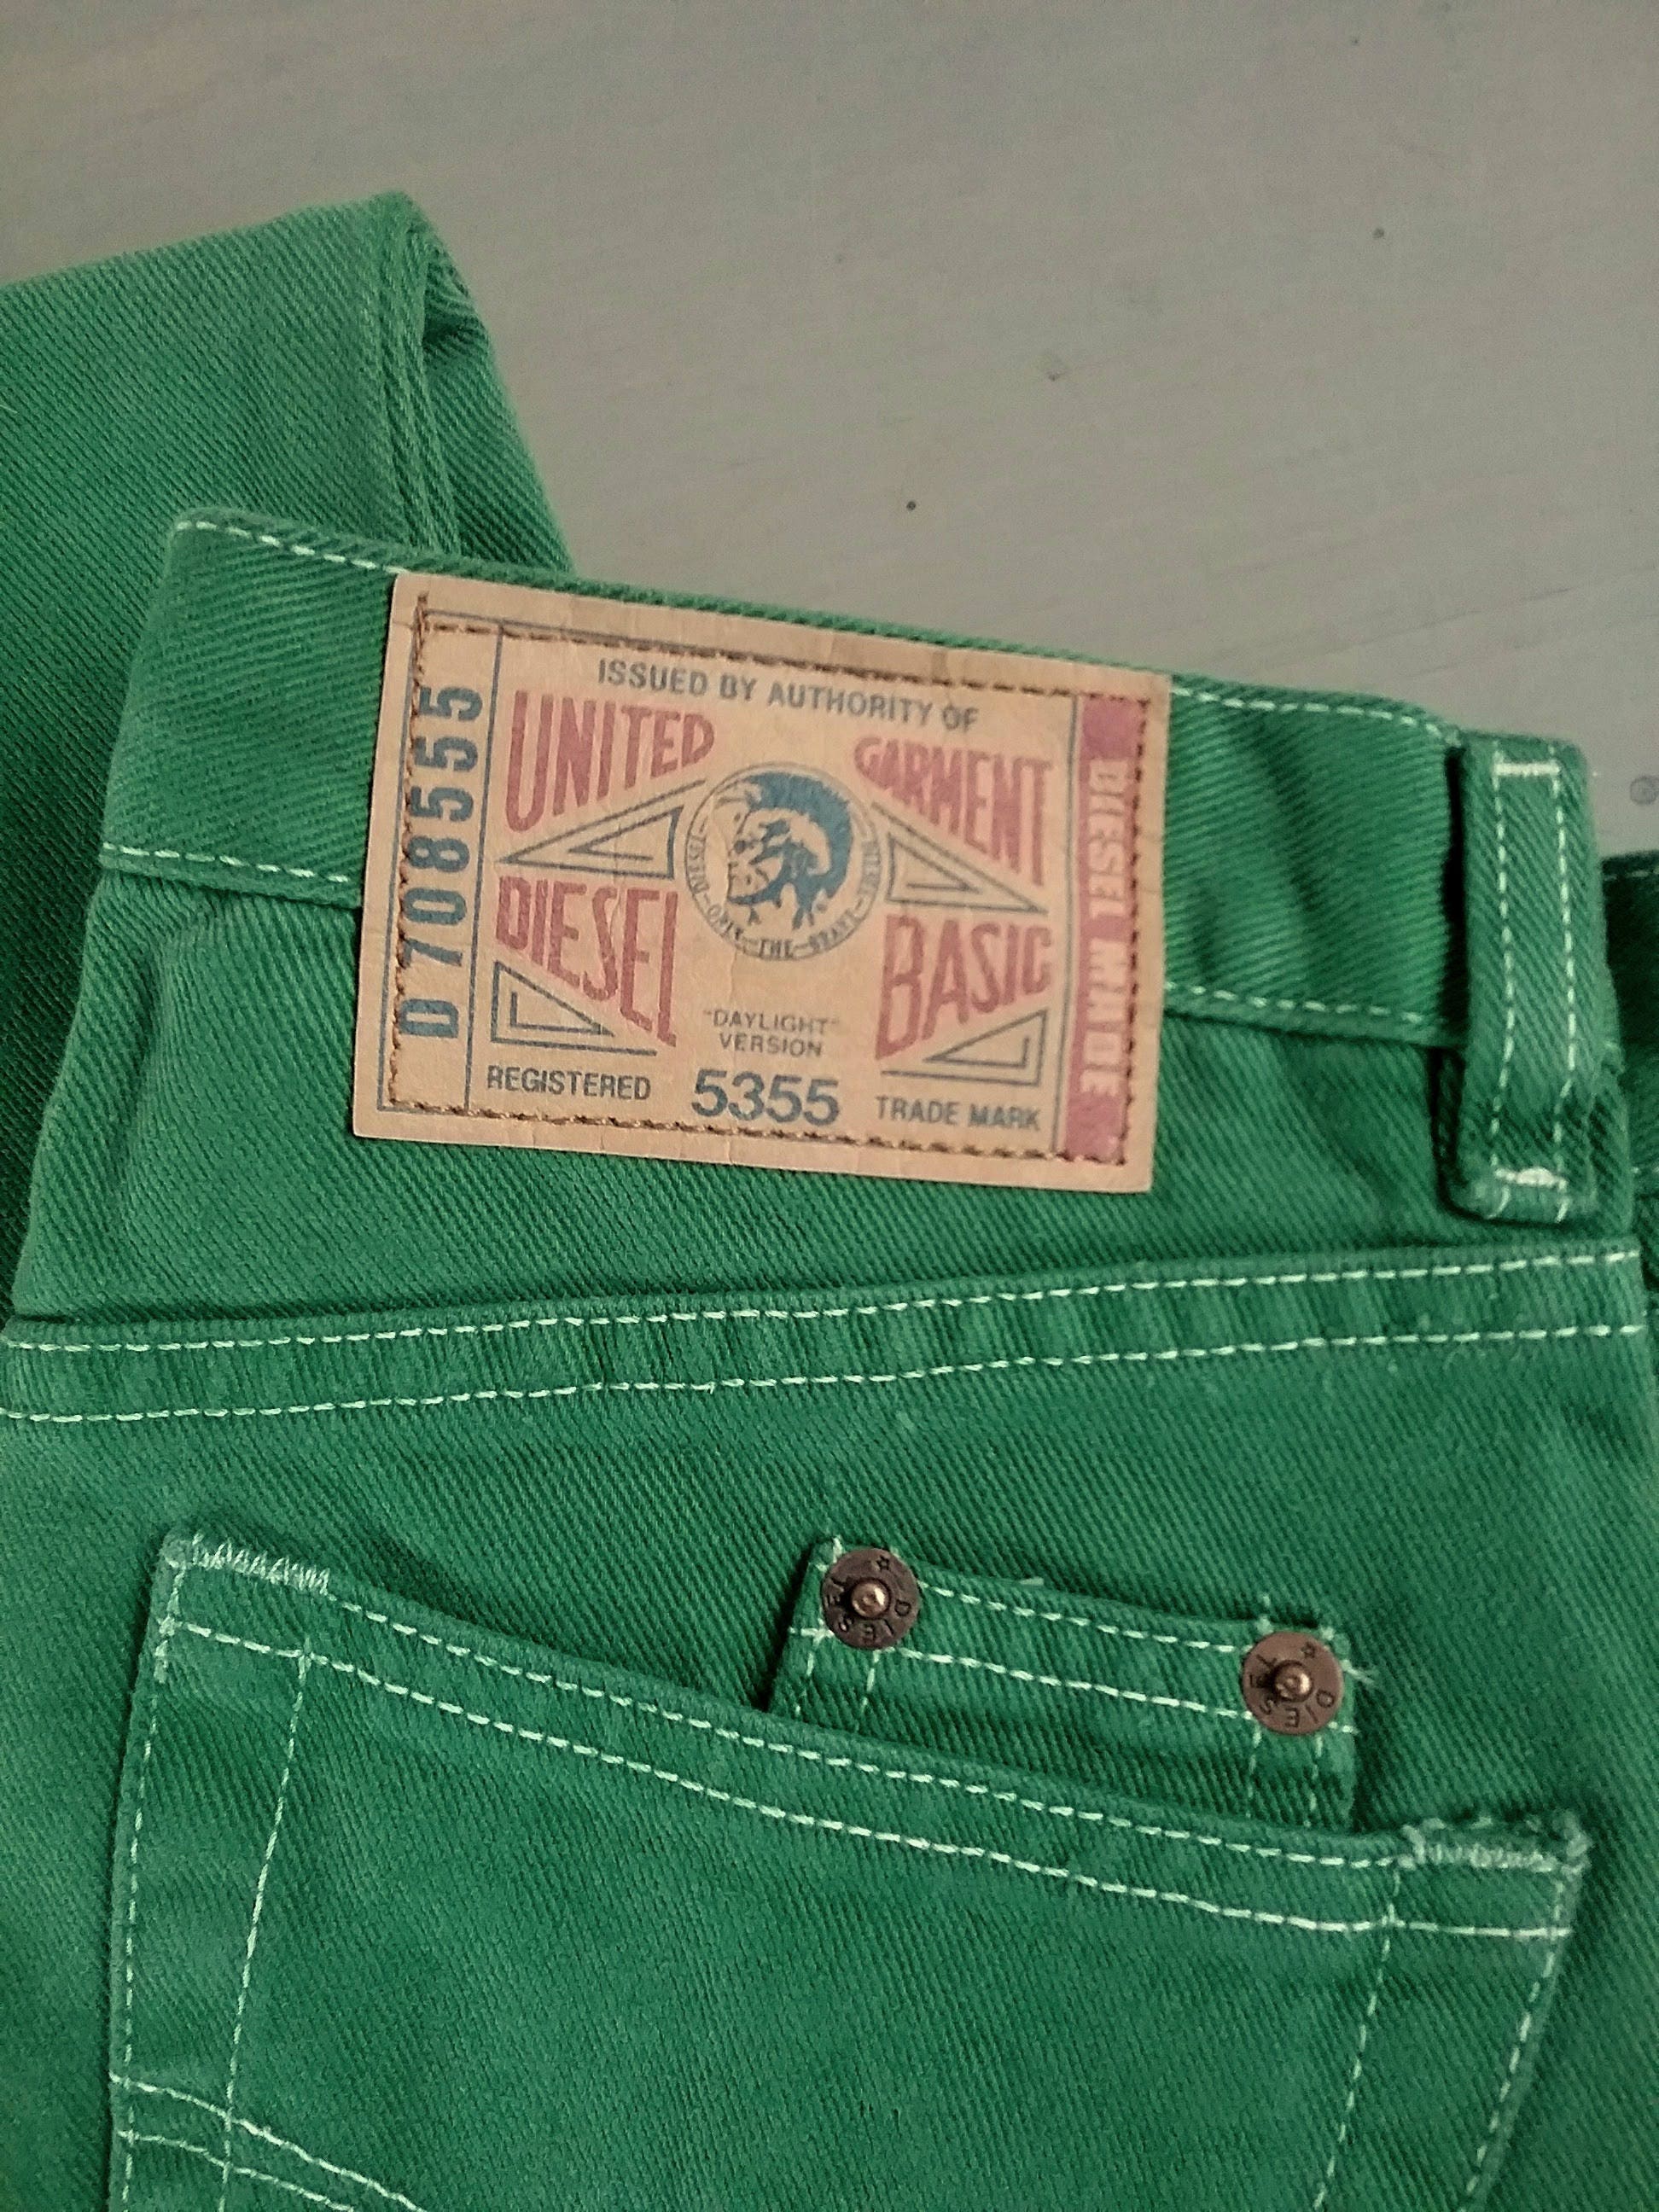 Diesel Jeans, Arizona, Green, 1990s, Boys Fashion, Men, Boys, Measurements,  Subject to Change, Vintage, Other -  Canada